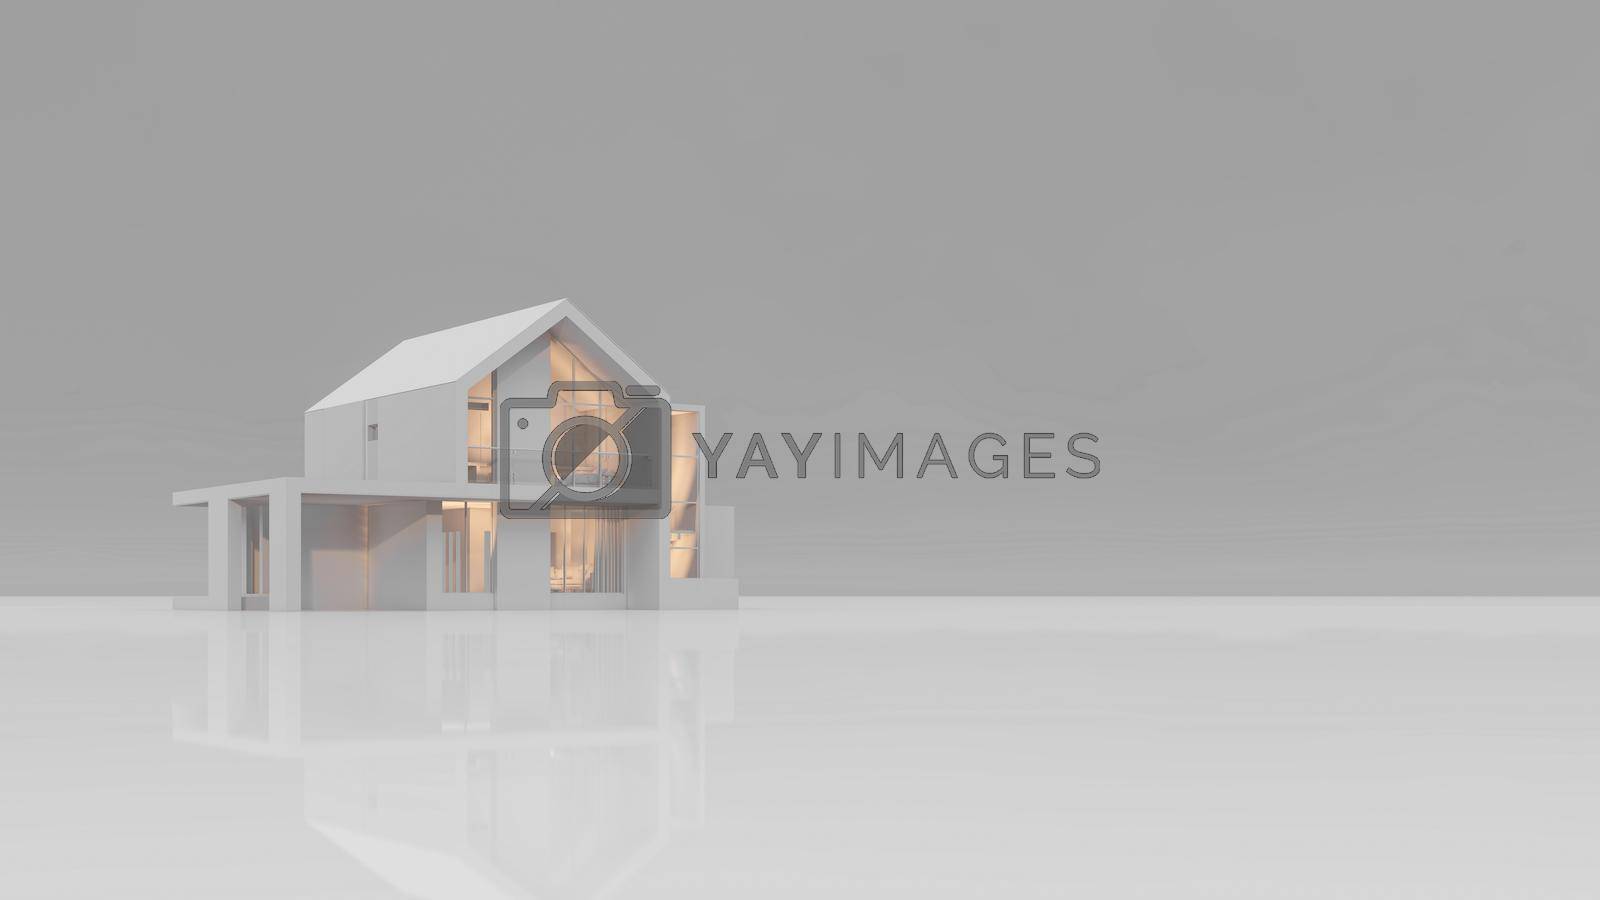 Royalty free image of 3D rendering illustration by Arissuu1